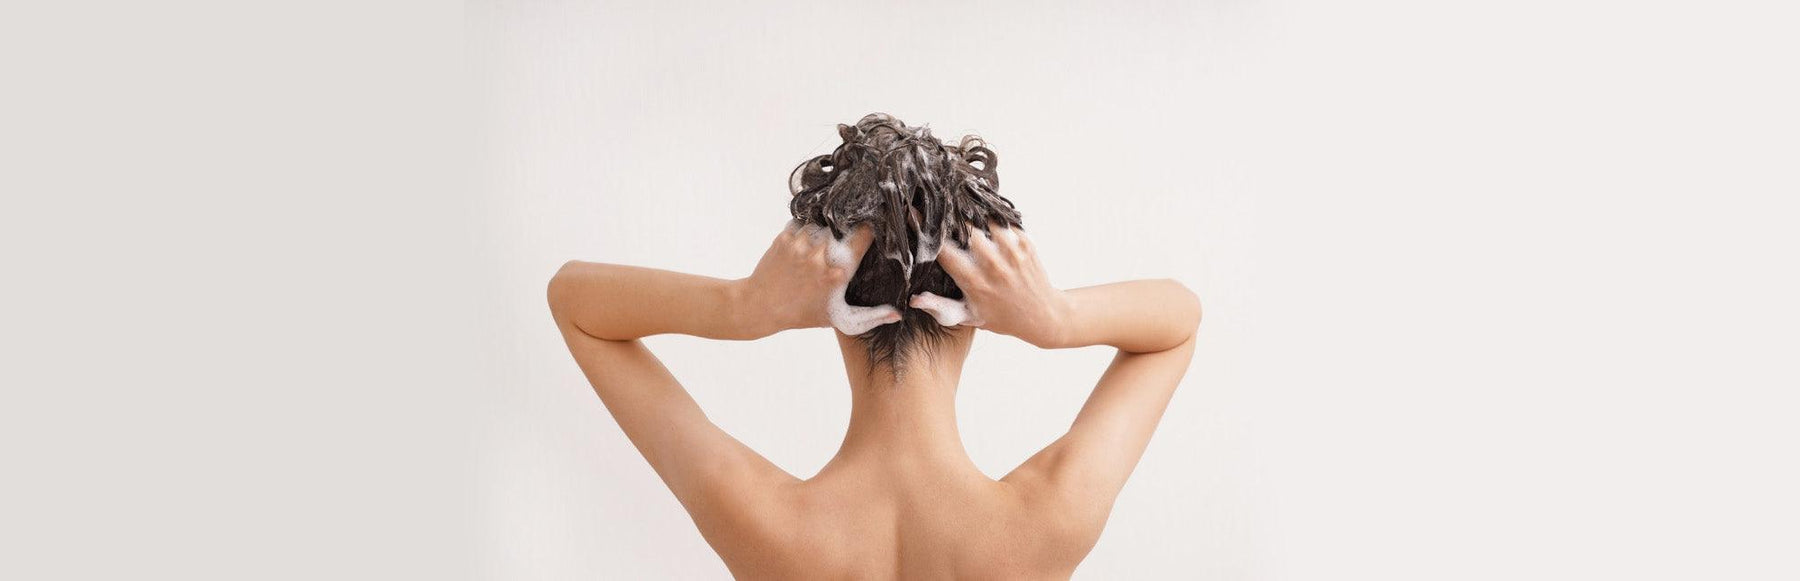 How Often Should I Wash and Condition My Hair? - Griffin Remedy